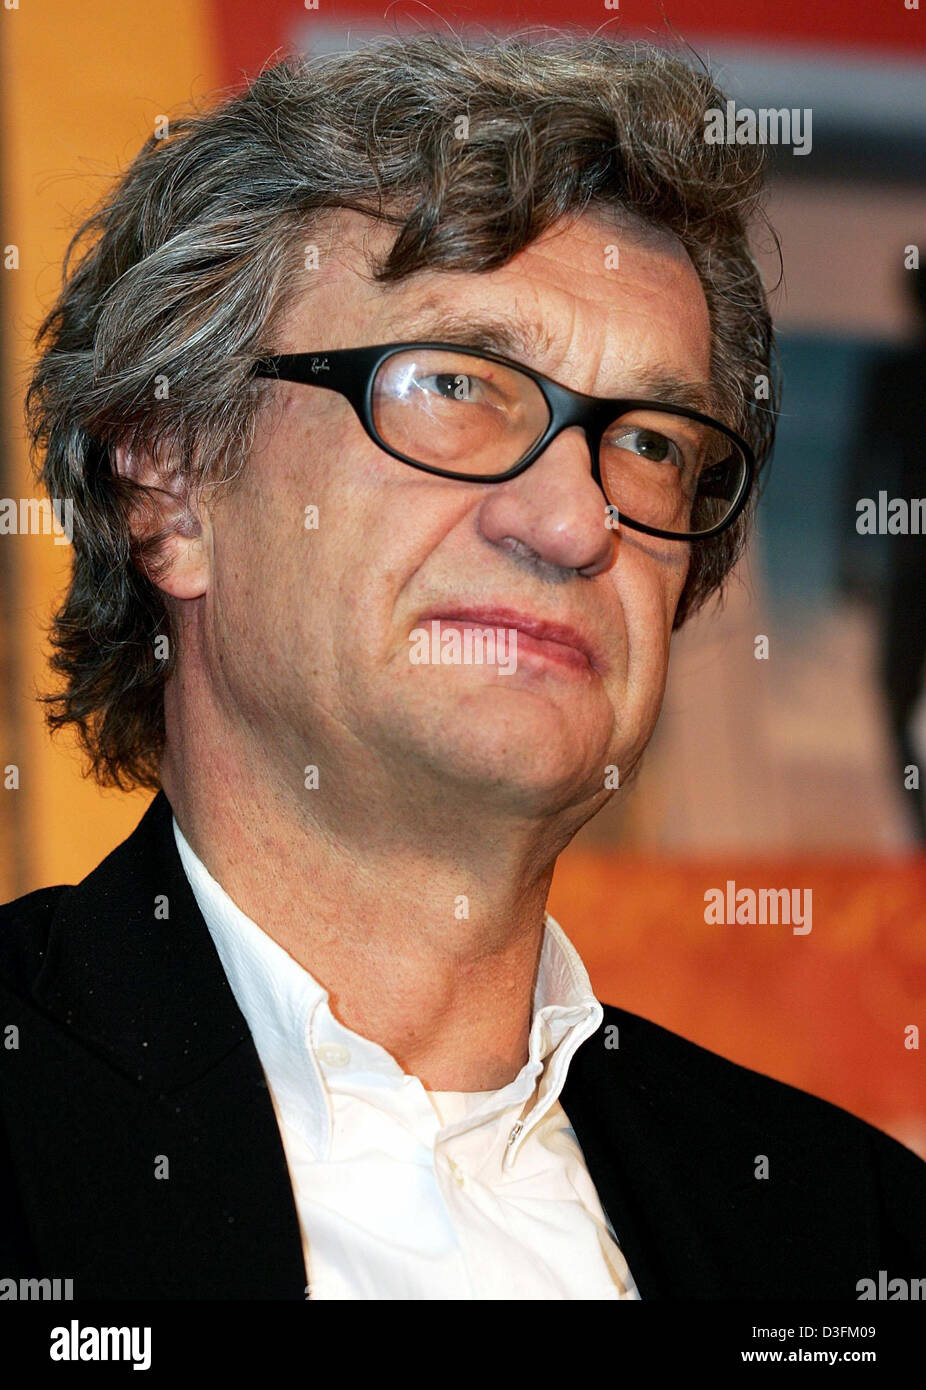 (dpa) - Famous German director Wim Wenders in a photograph taken during the 53rd International Filmfestival Mannheim-Heidelberg where he received the 'Master of Cinema-Award' for his lifetime achievements in Mannheim, Germany, 24 November 2004. Wenders' films include international acclaimed titles such as Paris; Texas, The Sky Over Berlin, Buena Vista Social Club and The Million Do Stock Photo